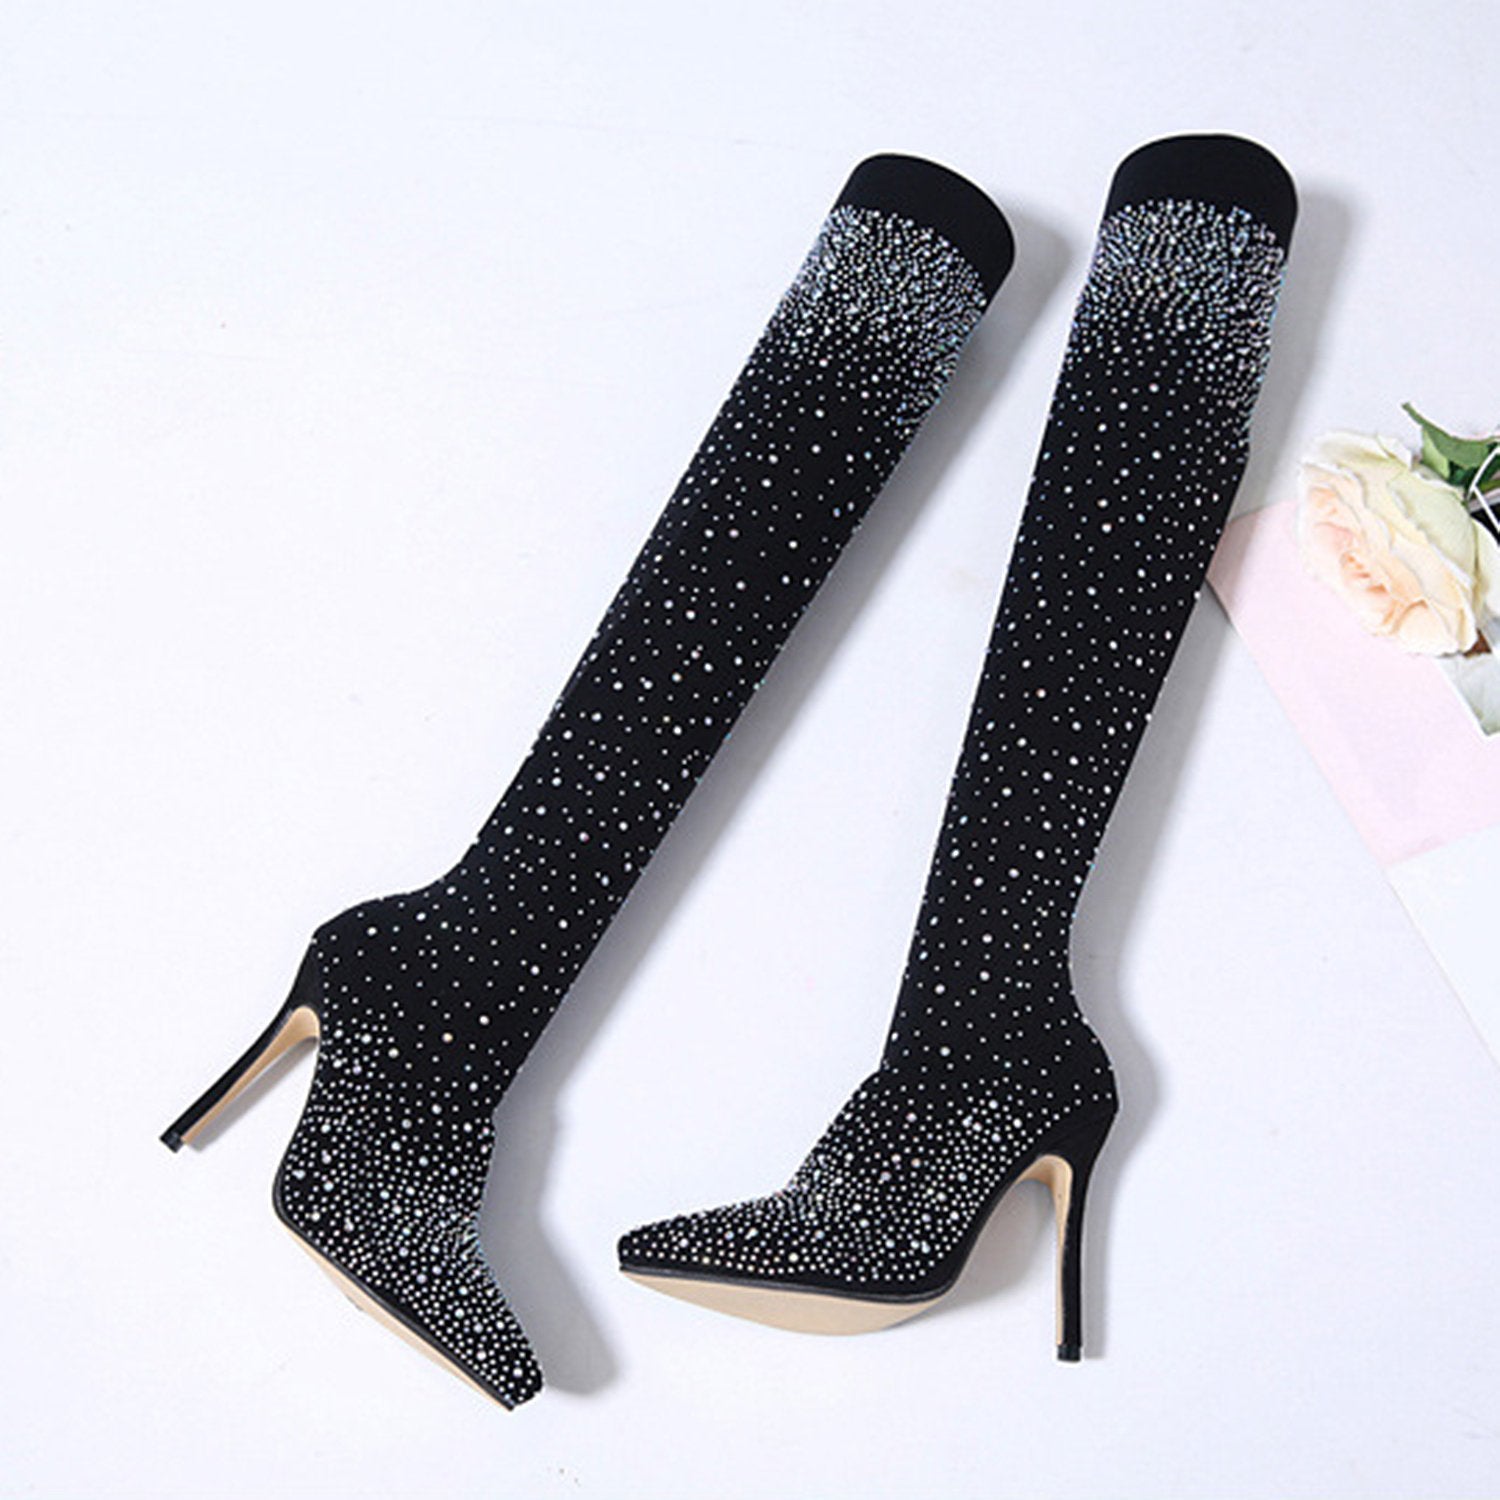 Pointed-High-Heeled-Rhinestone-Boots-over-high